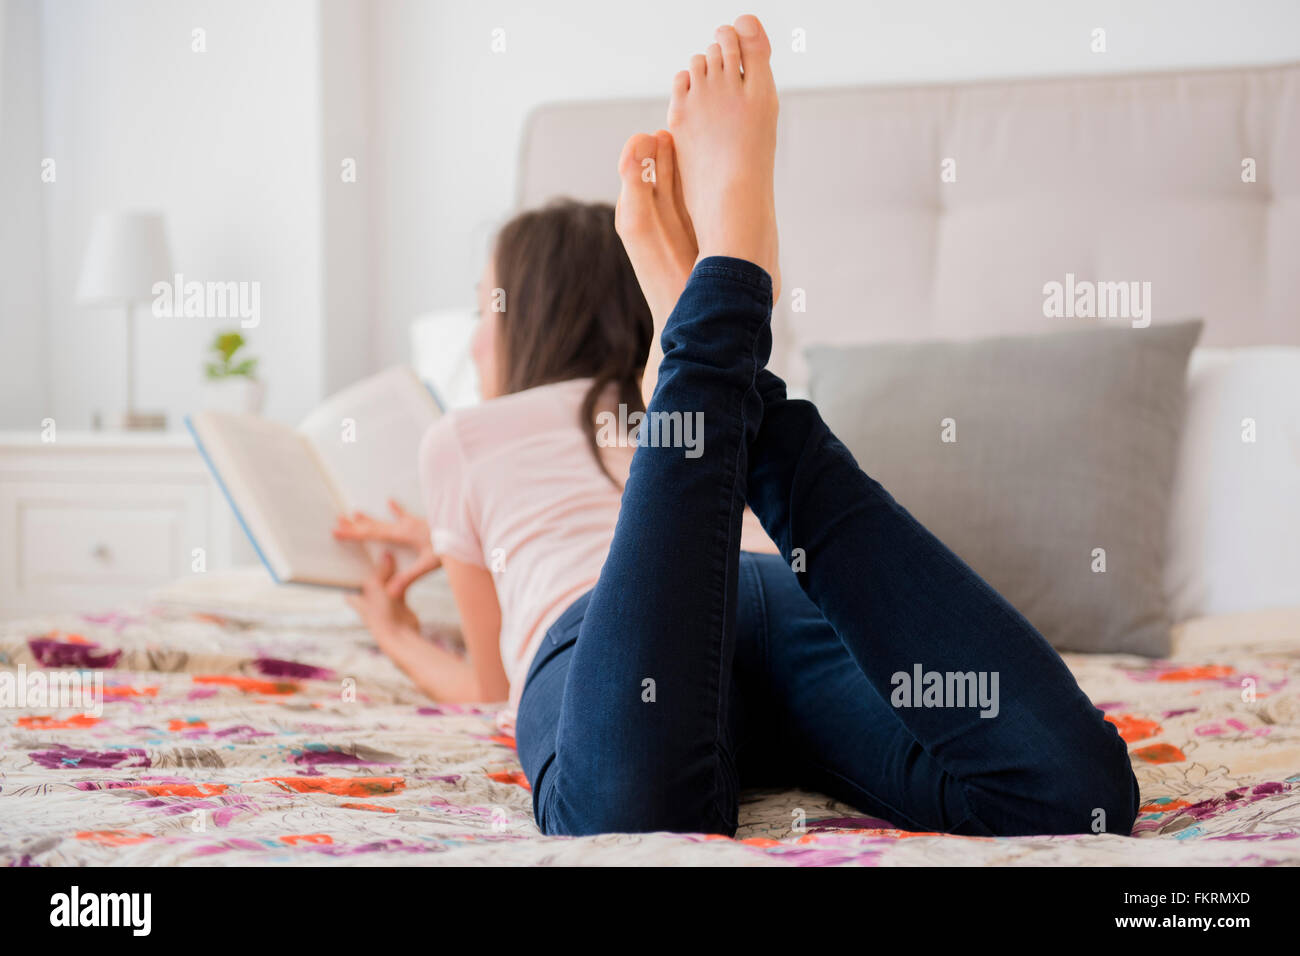 Mixed race woman reading book on bed Stock Photo